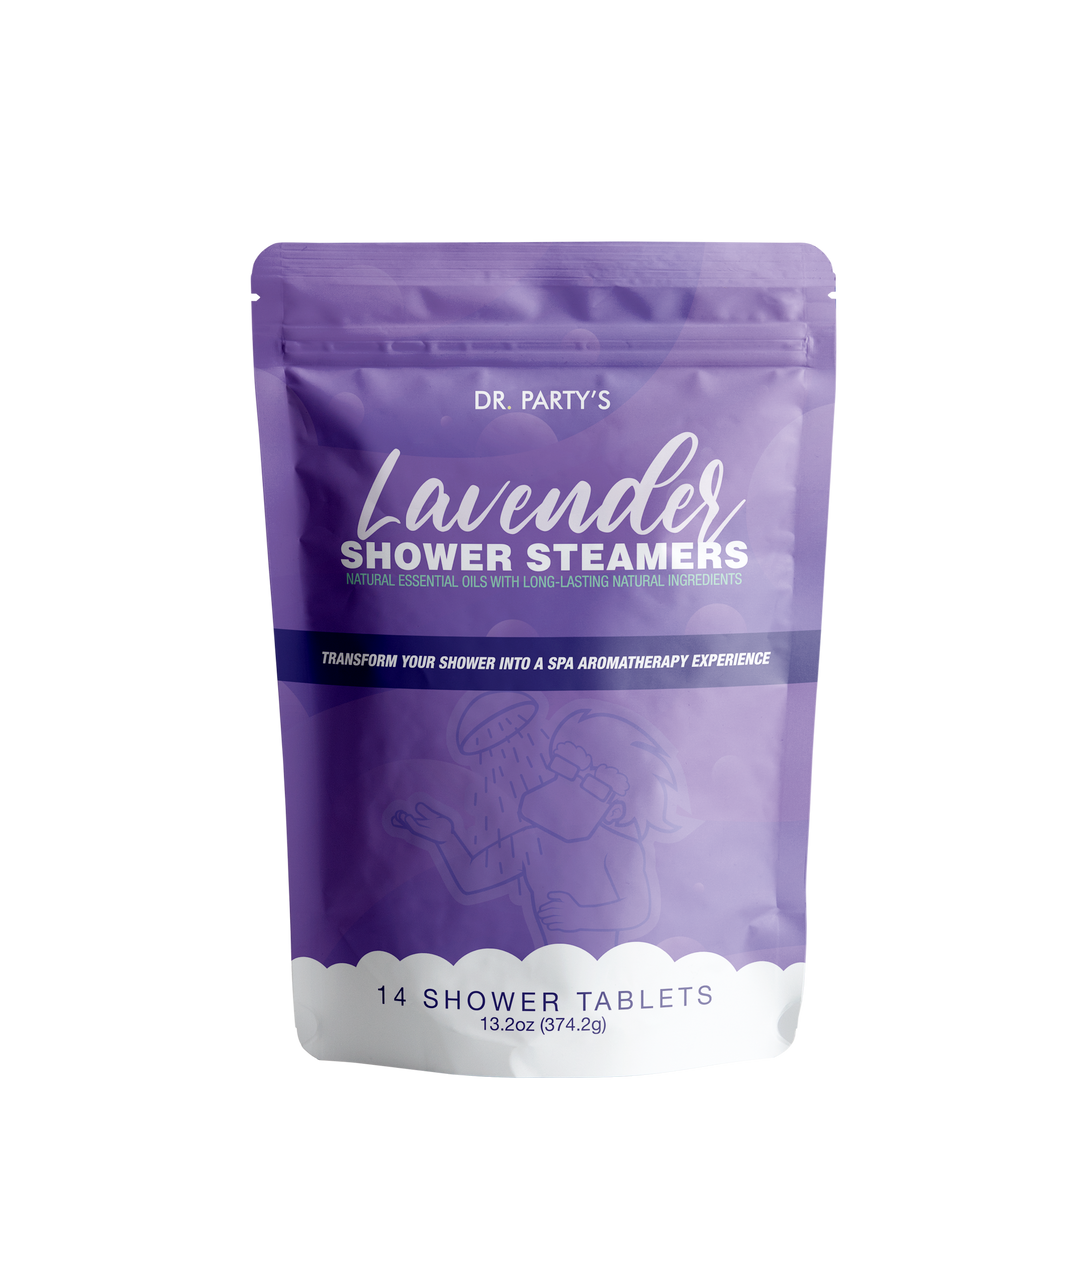 Experience the serenity of a spa day every day with our lavender-scented shower steamers, available in a pack of 14, perfect for infusing your routine with peaceful bliss.